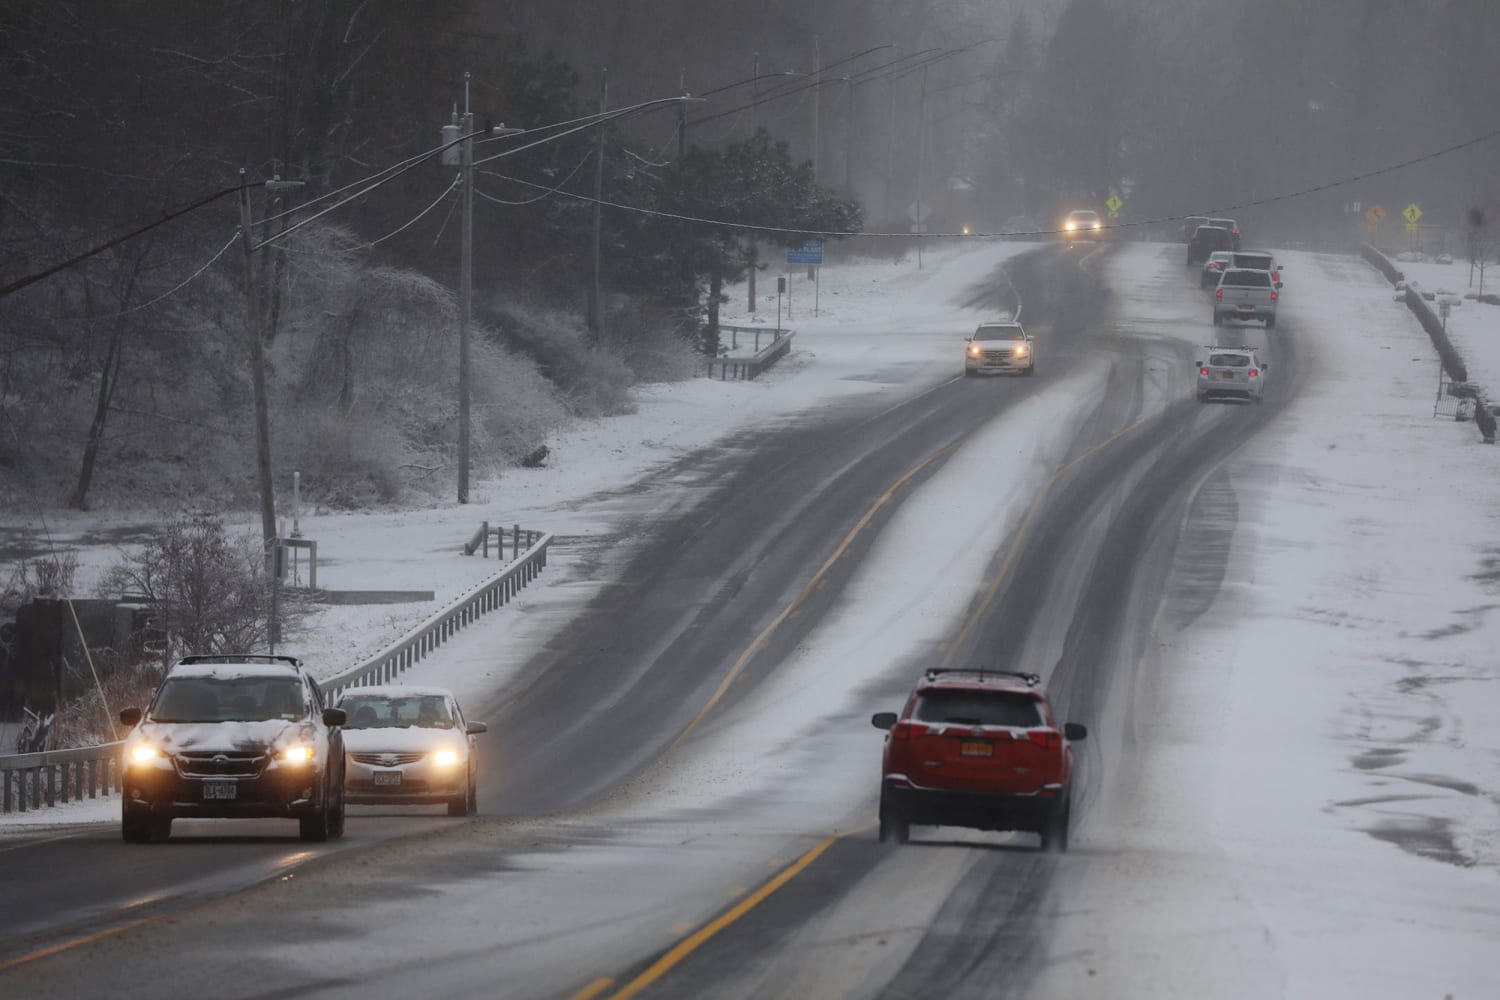 Major winter storm to wallop parts of the U.S. with heavy snow, rain over long weekend